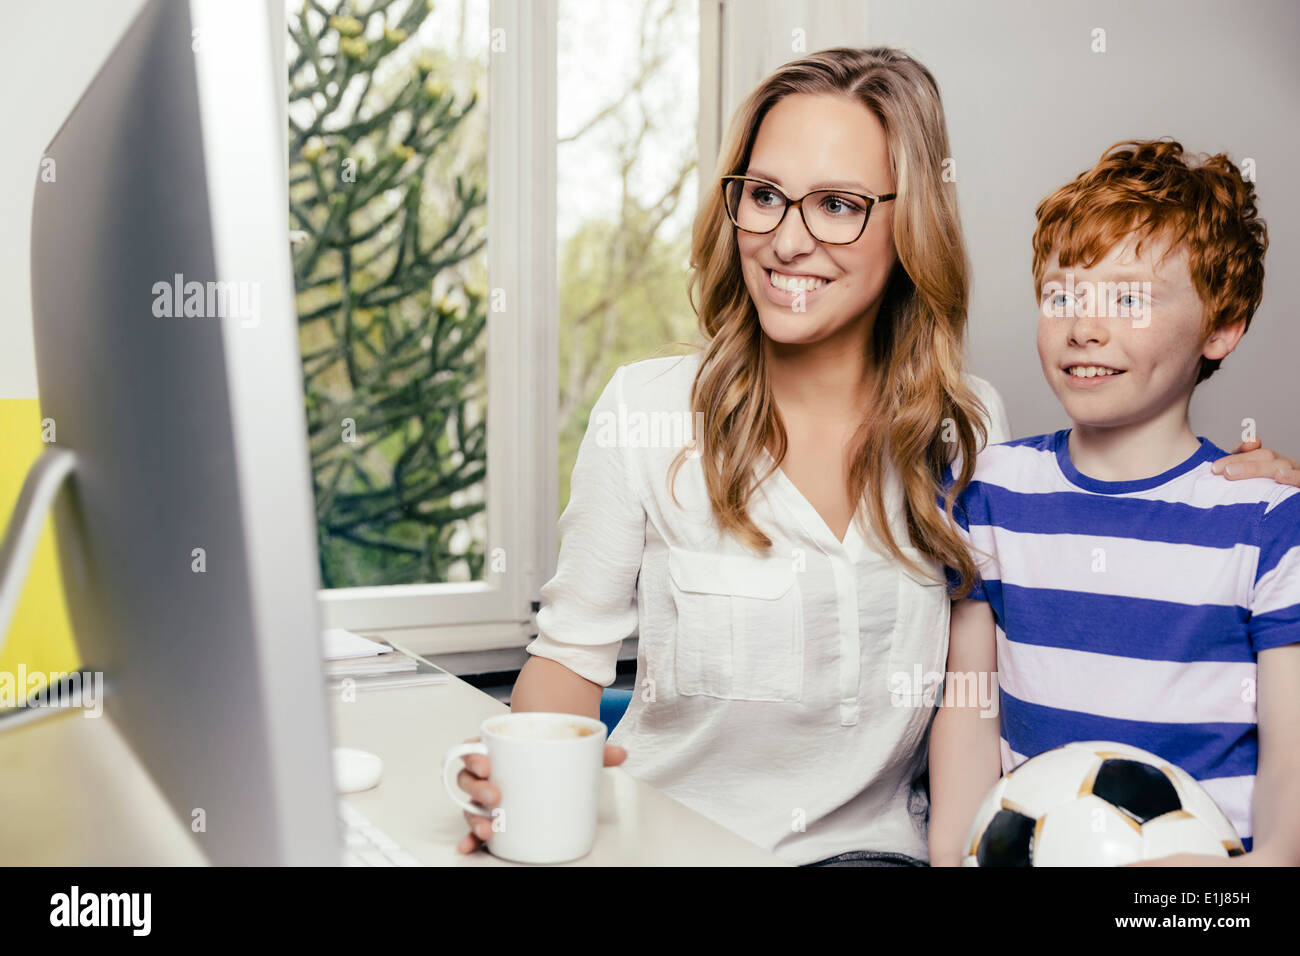 Mother and son with soccer ball at desk with computer Stock Photo